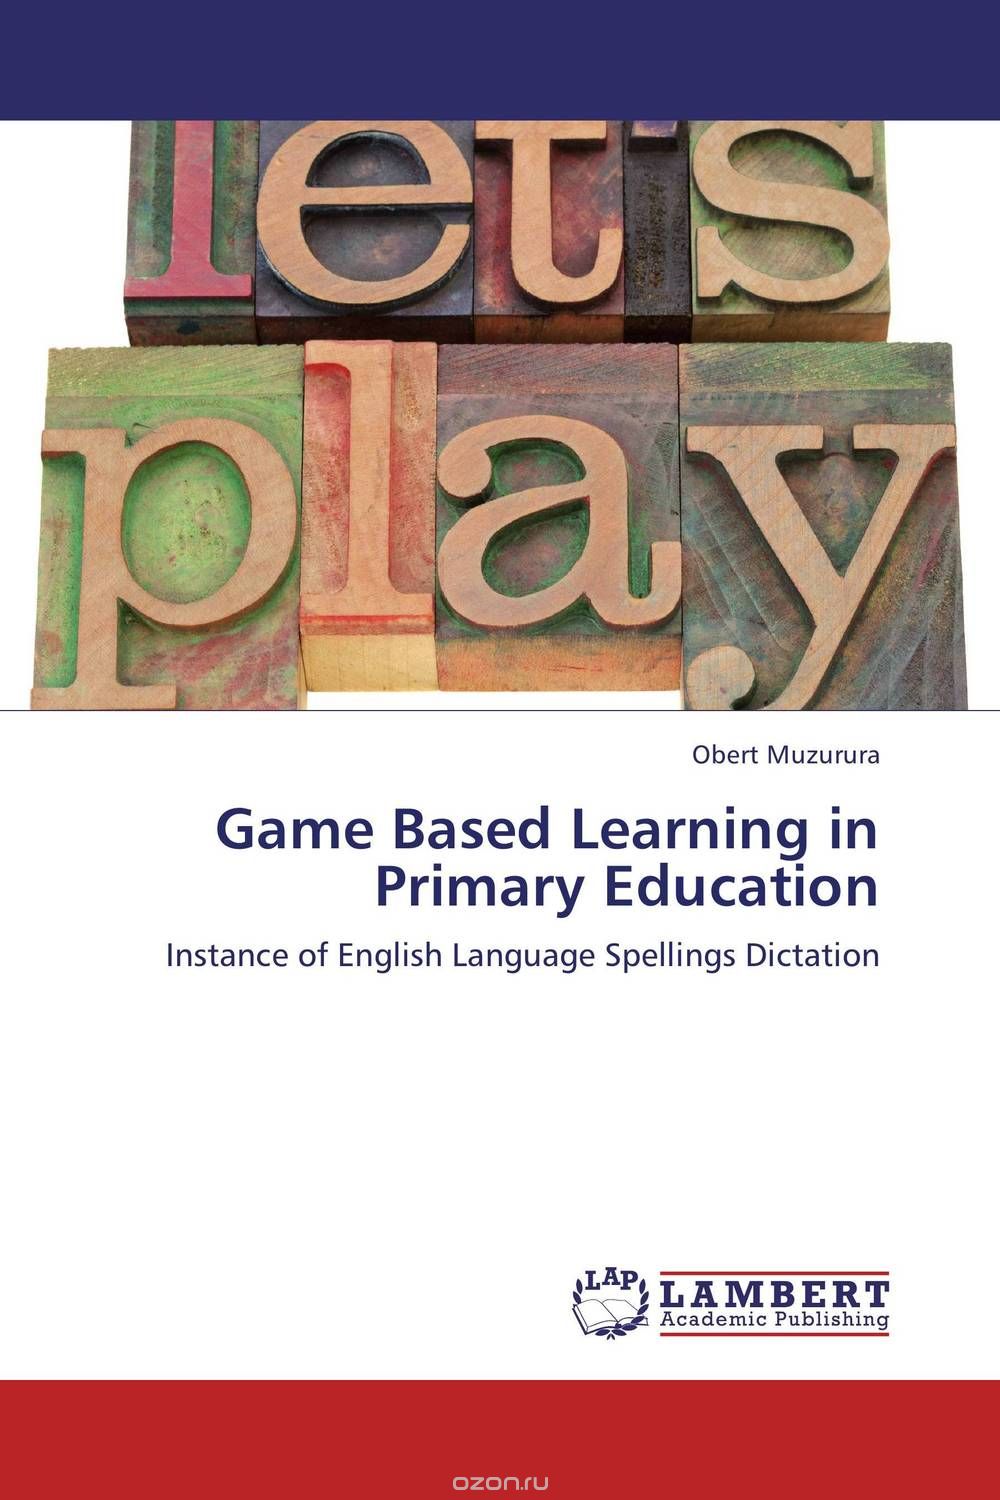 Скачать книгу "Game Based Learning in Primary Education"